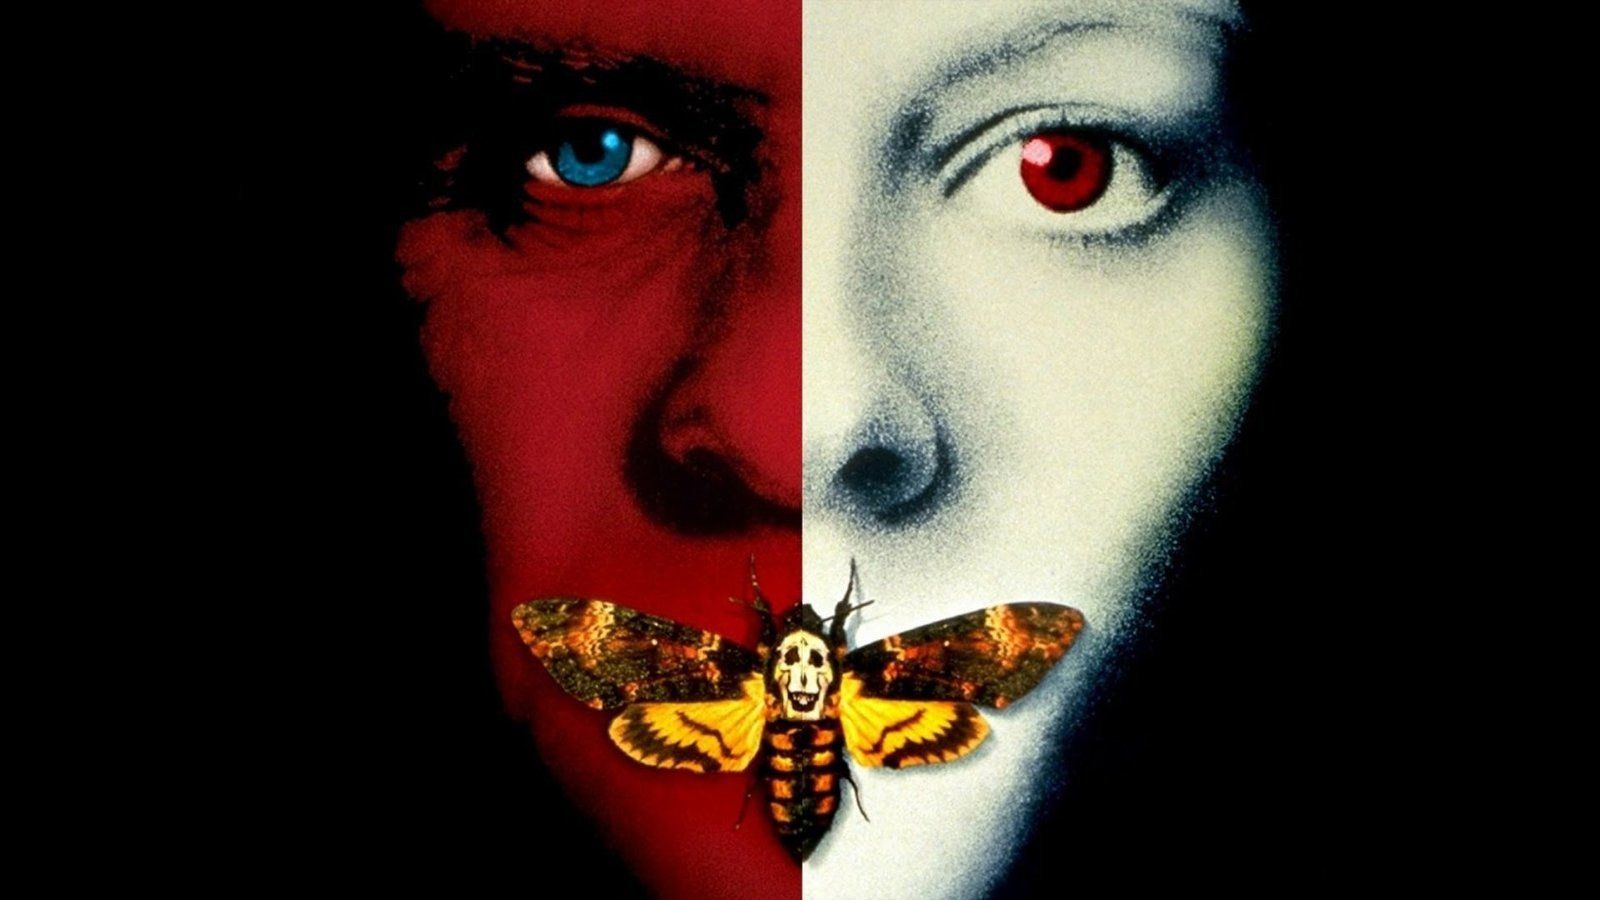 The Silence Of The Lambs (1991)